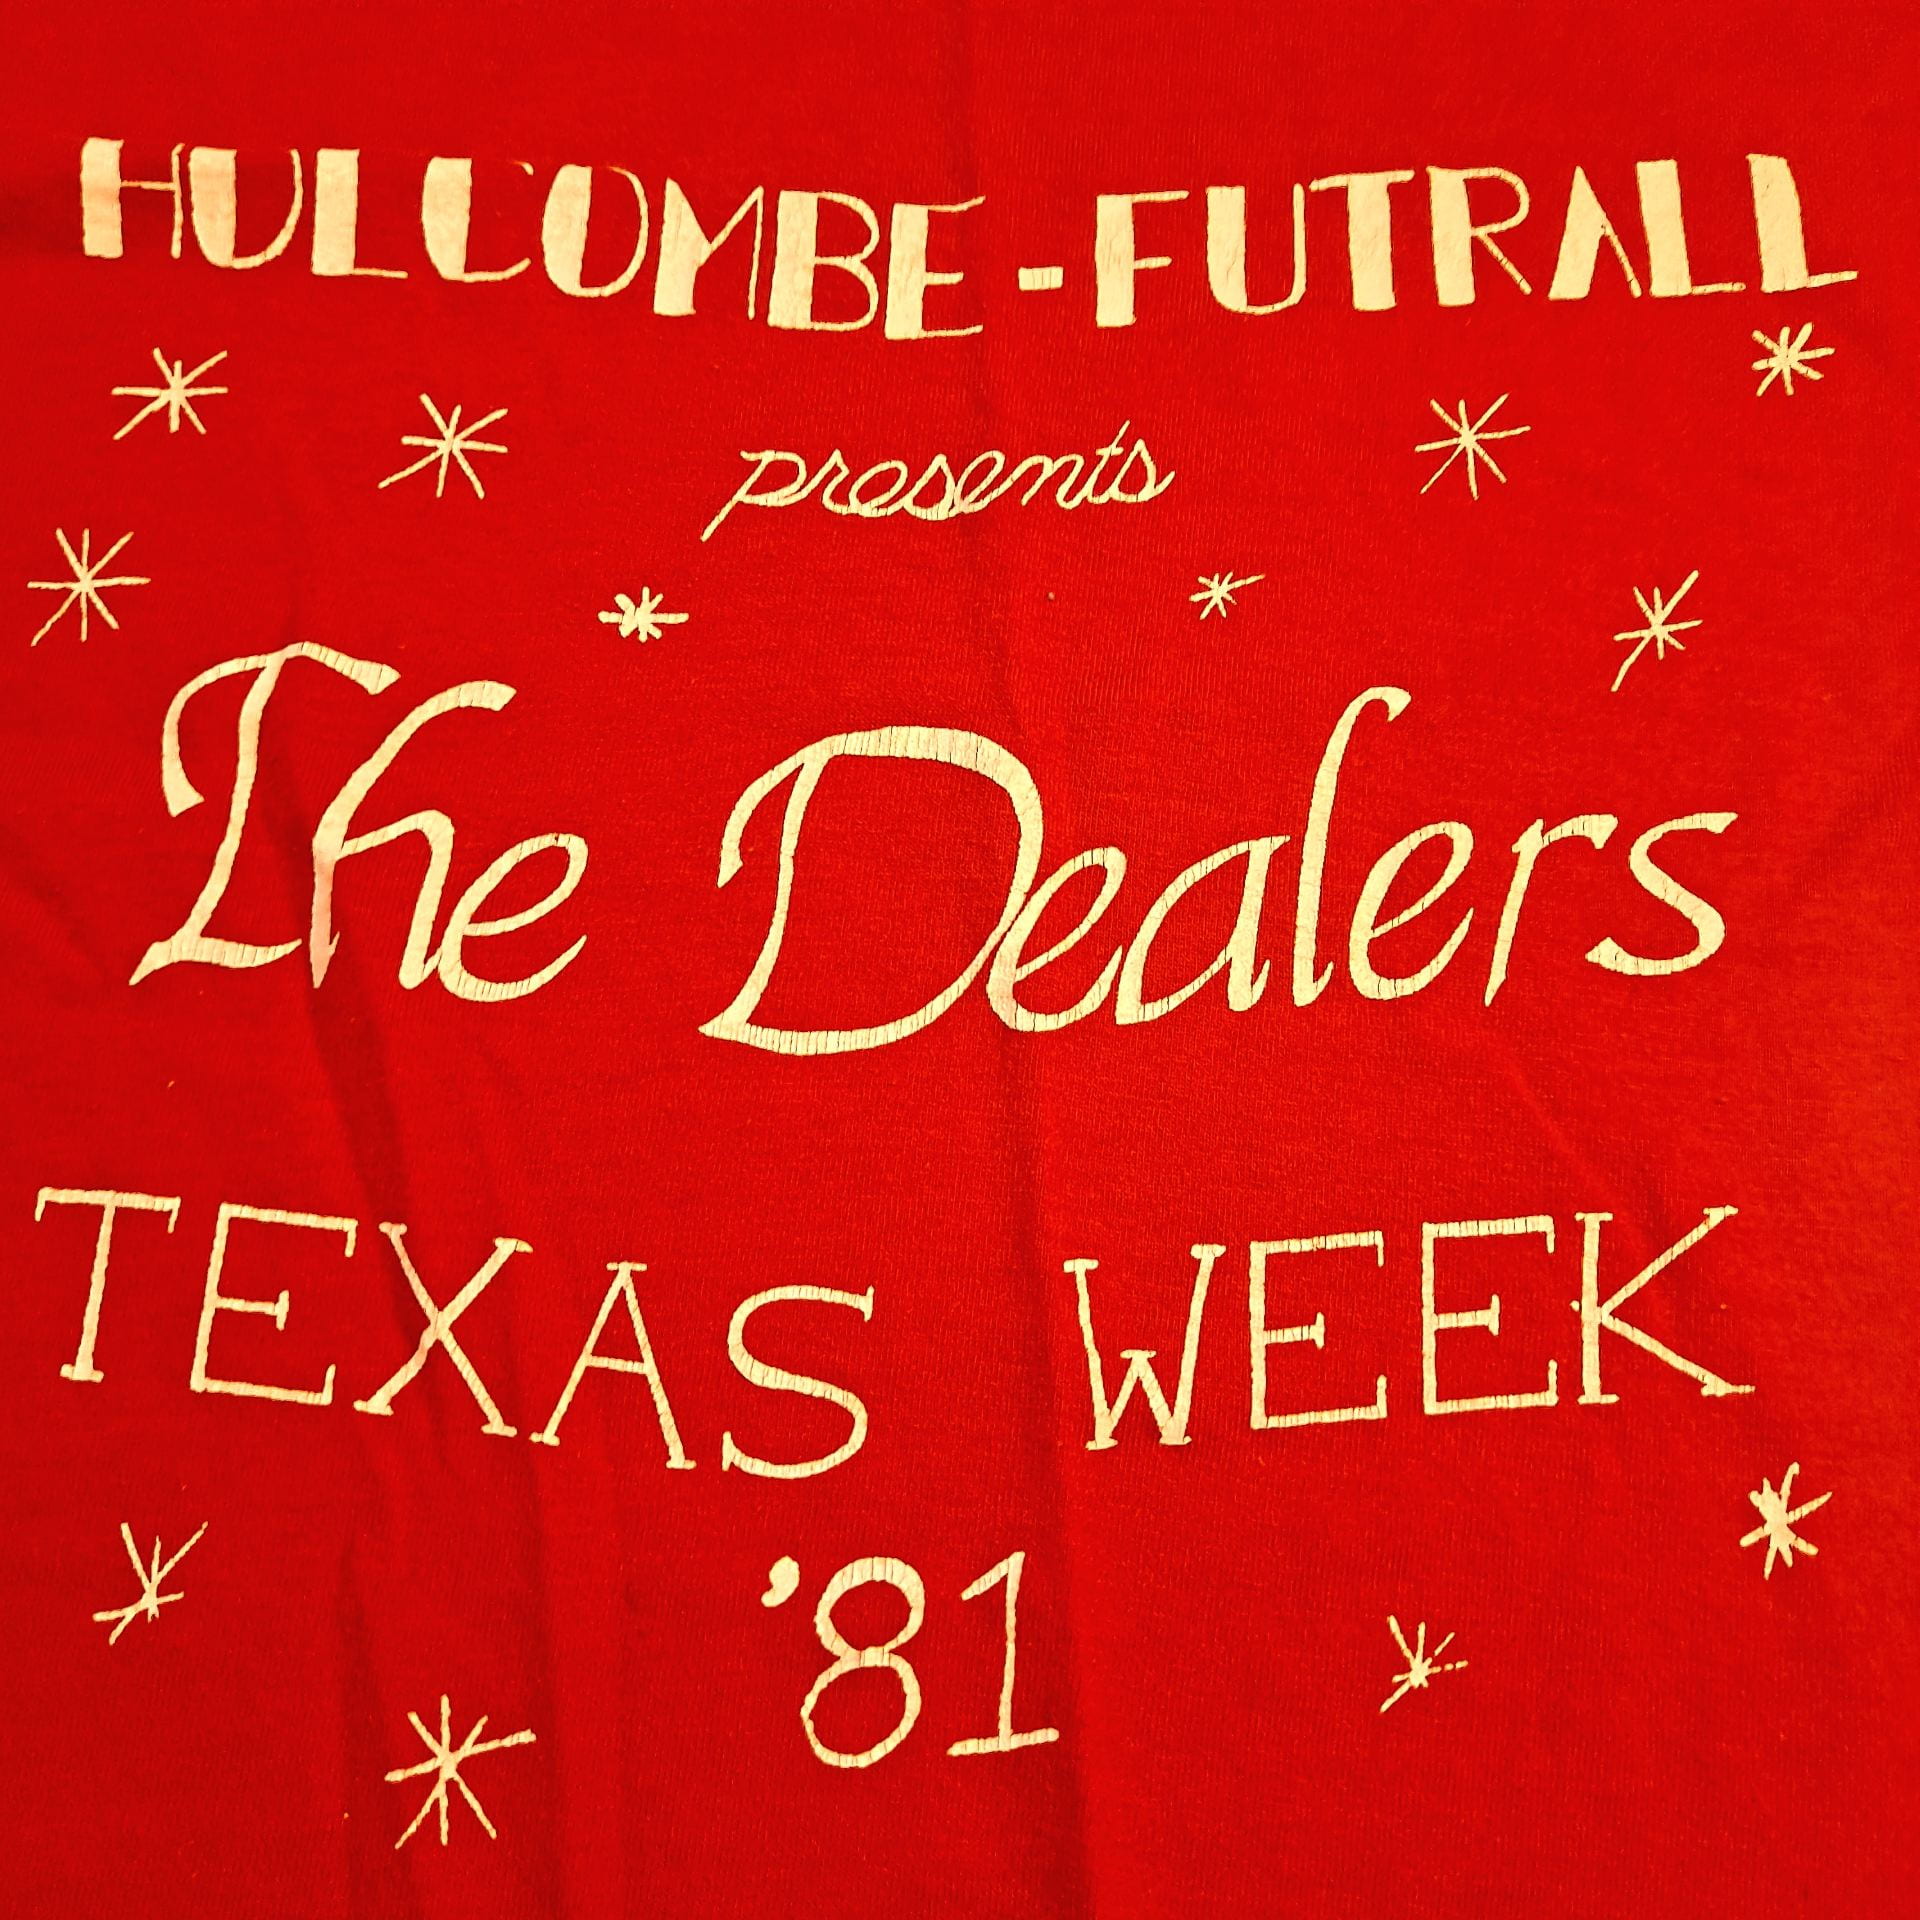 Close-up of a red t-shirt that says "Holcumbe-Futrall presents The Dealers Texas Week '81"